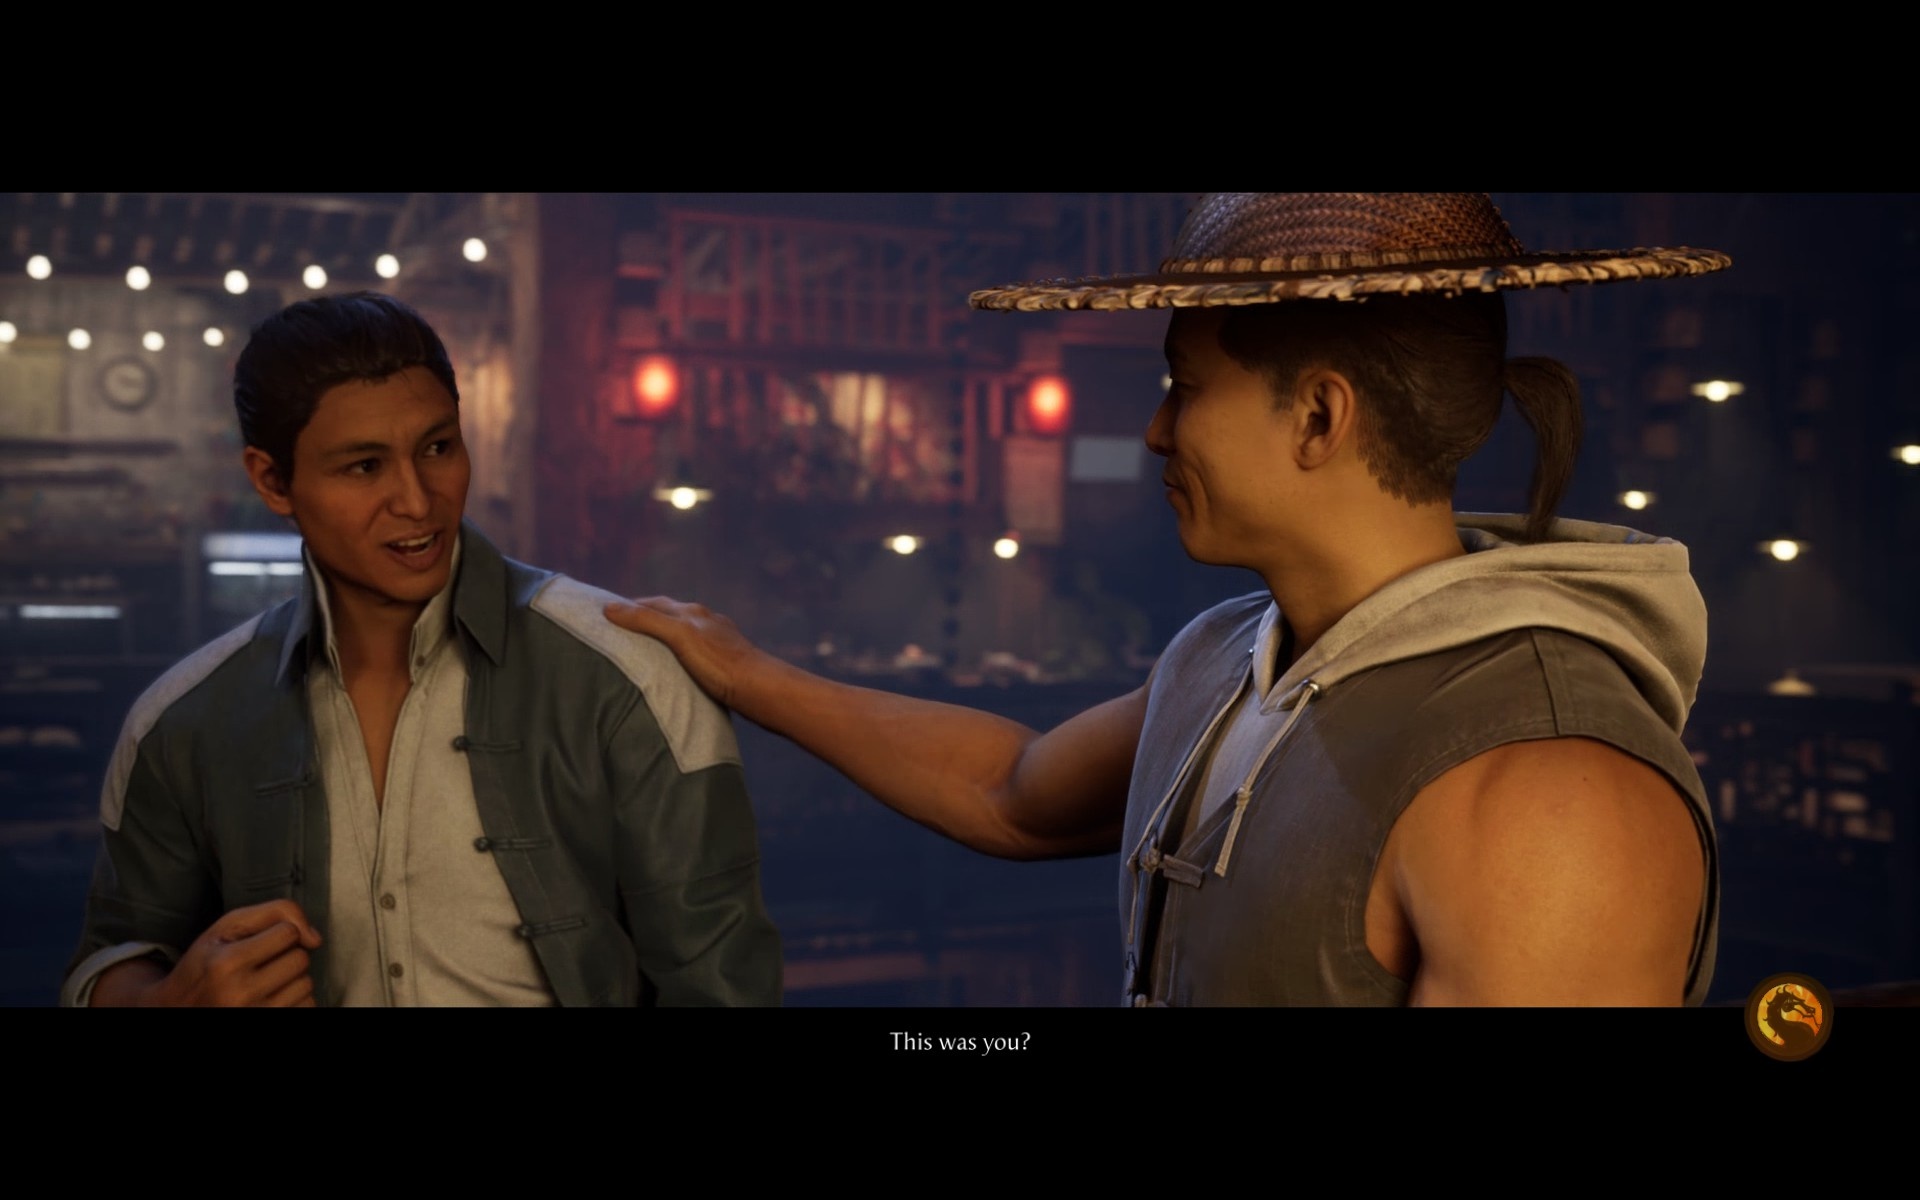 (Two regular guys: Raiden and Liu Kang without superpowers and bloody finishers provide an unusual gameplay introduction in the campaign)